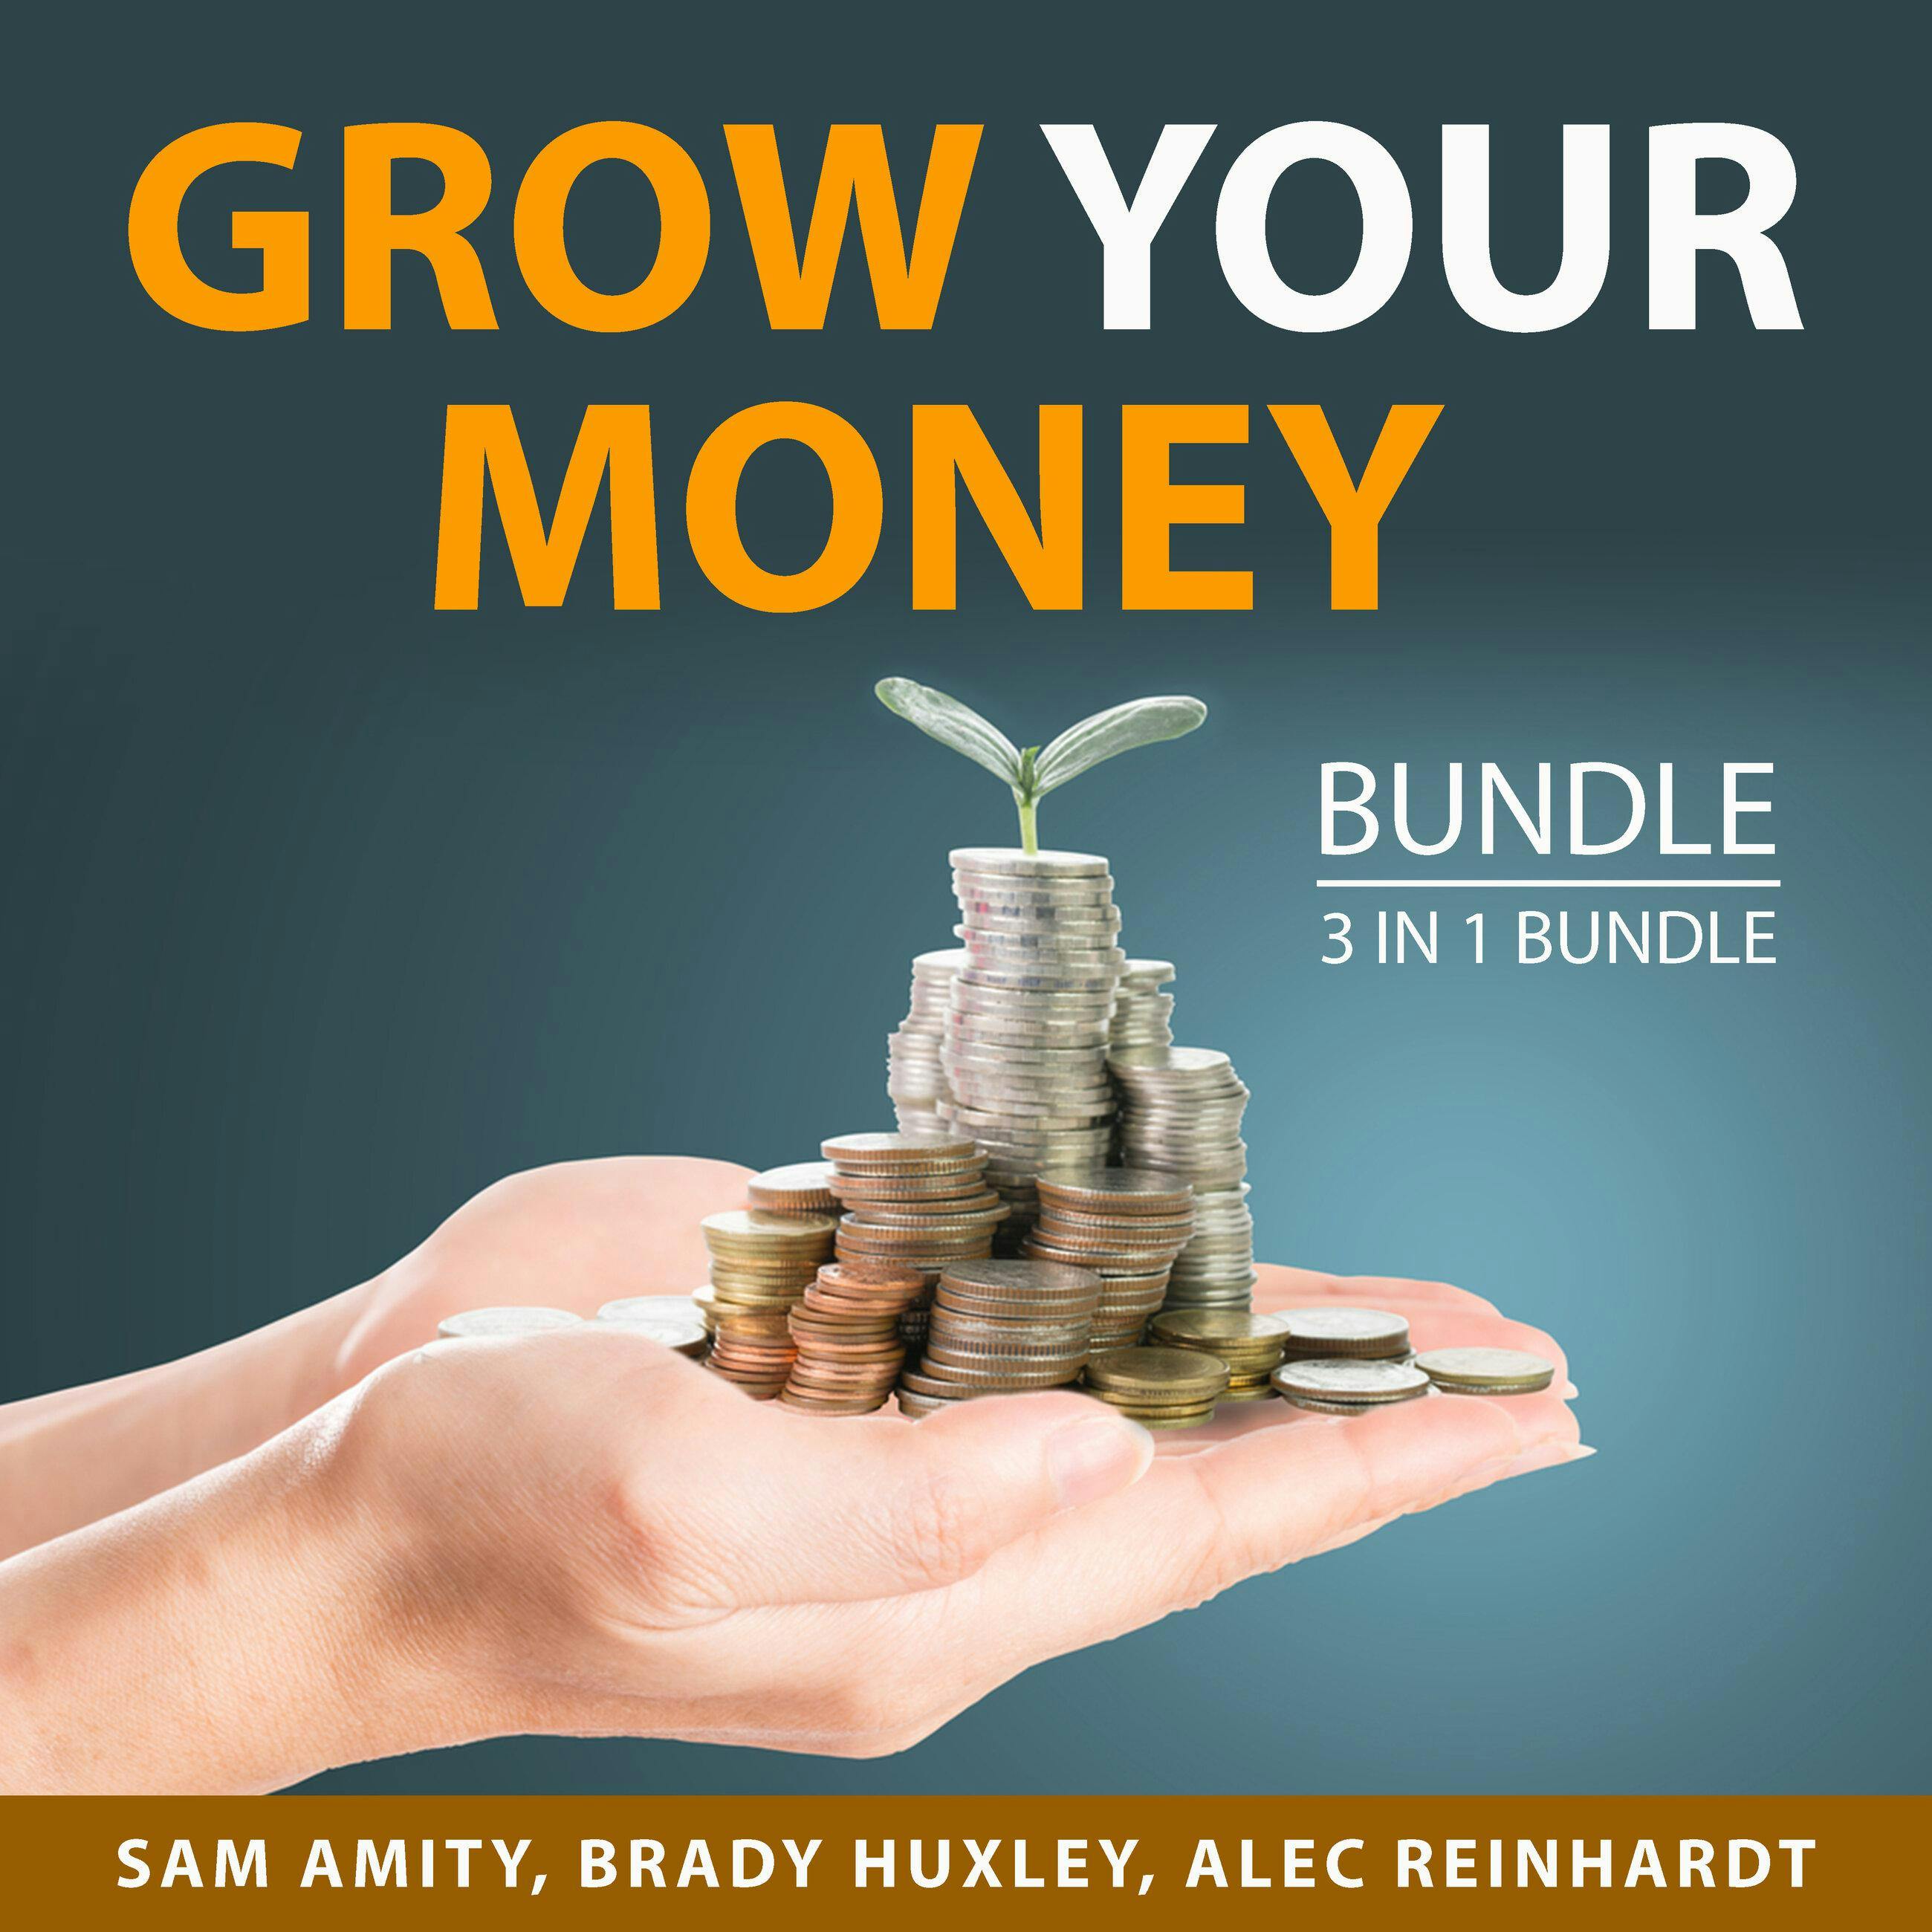 Grow Your Money Bundle, 3 in 1 Bundle: Budgeting and Personal Finance, Money Attraction Blueprint, and Financial Abundance - undefined